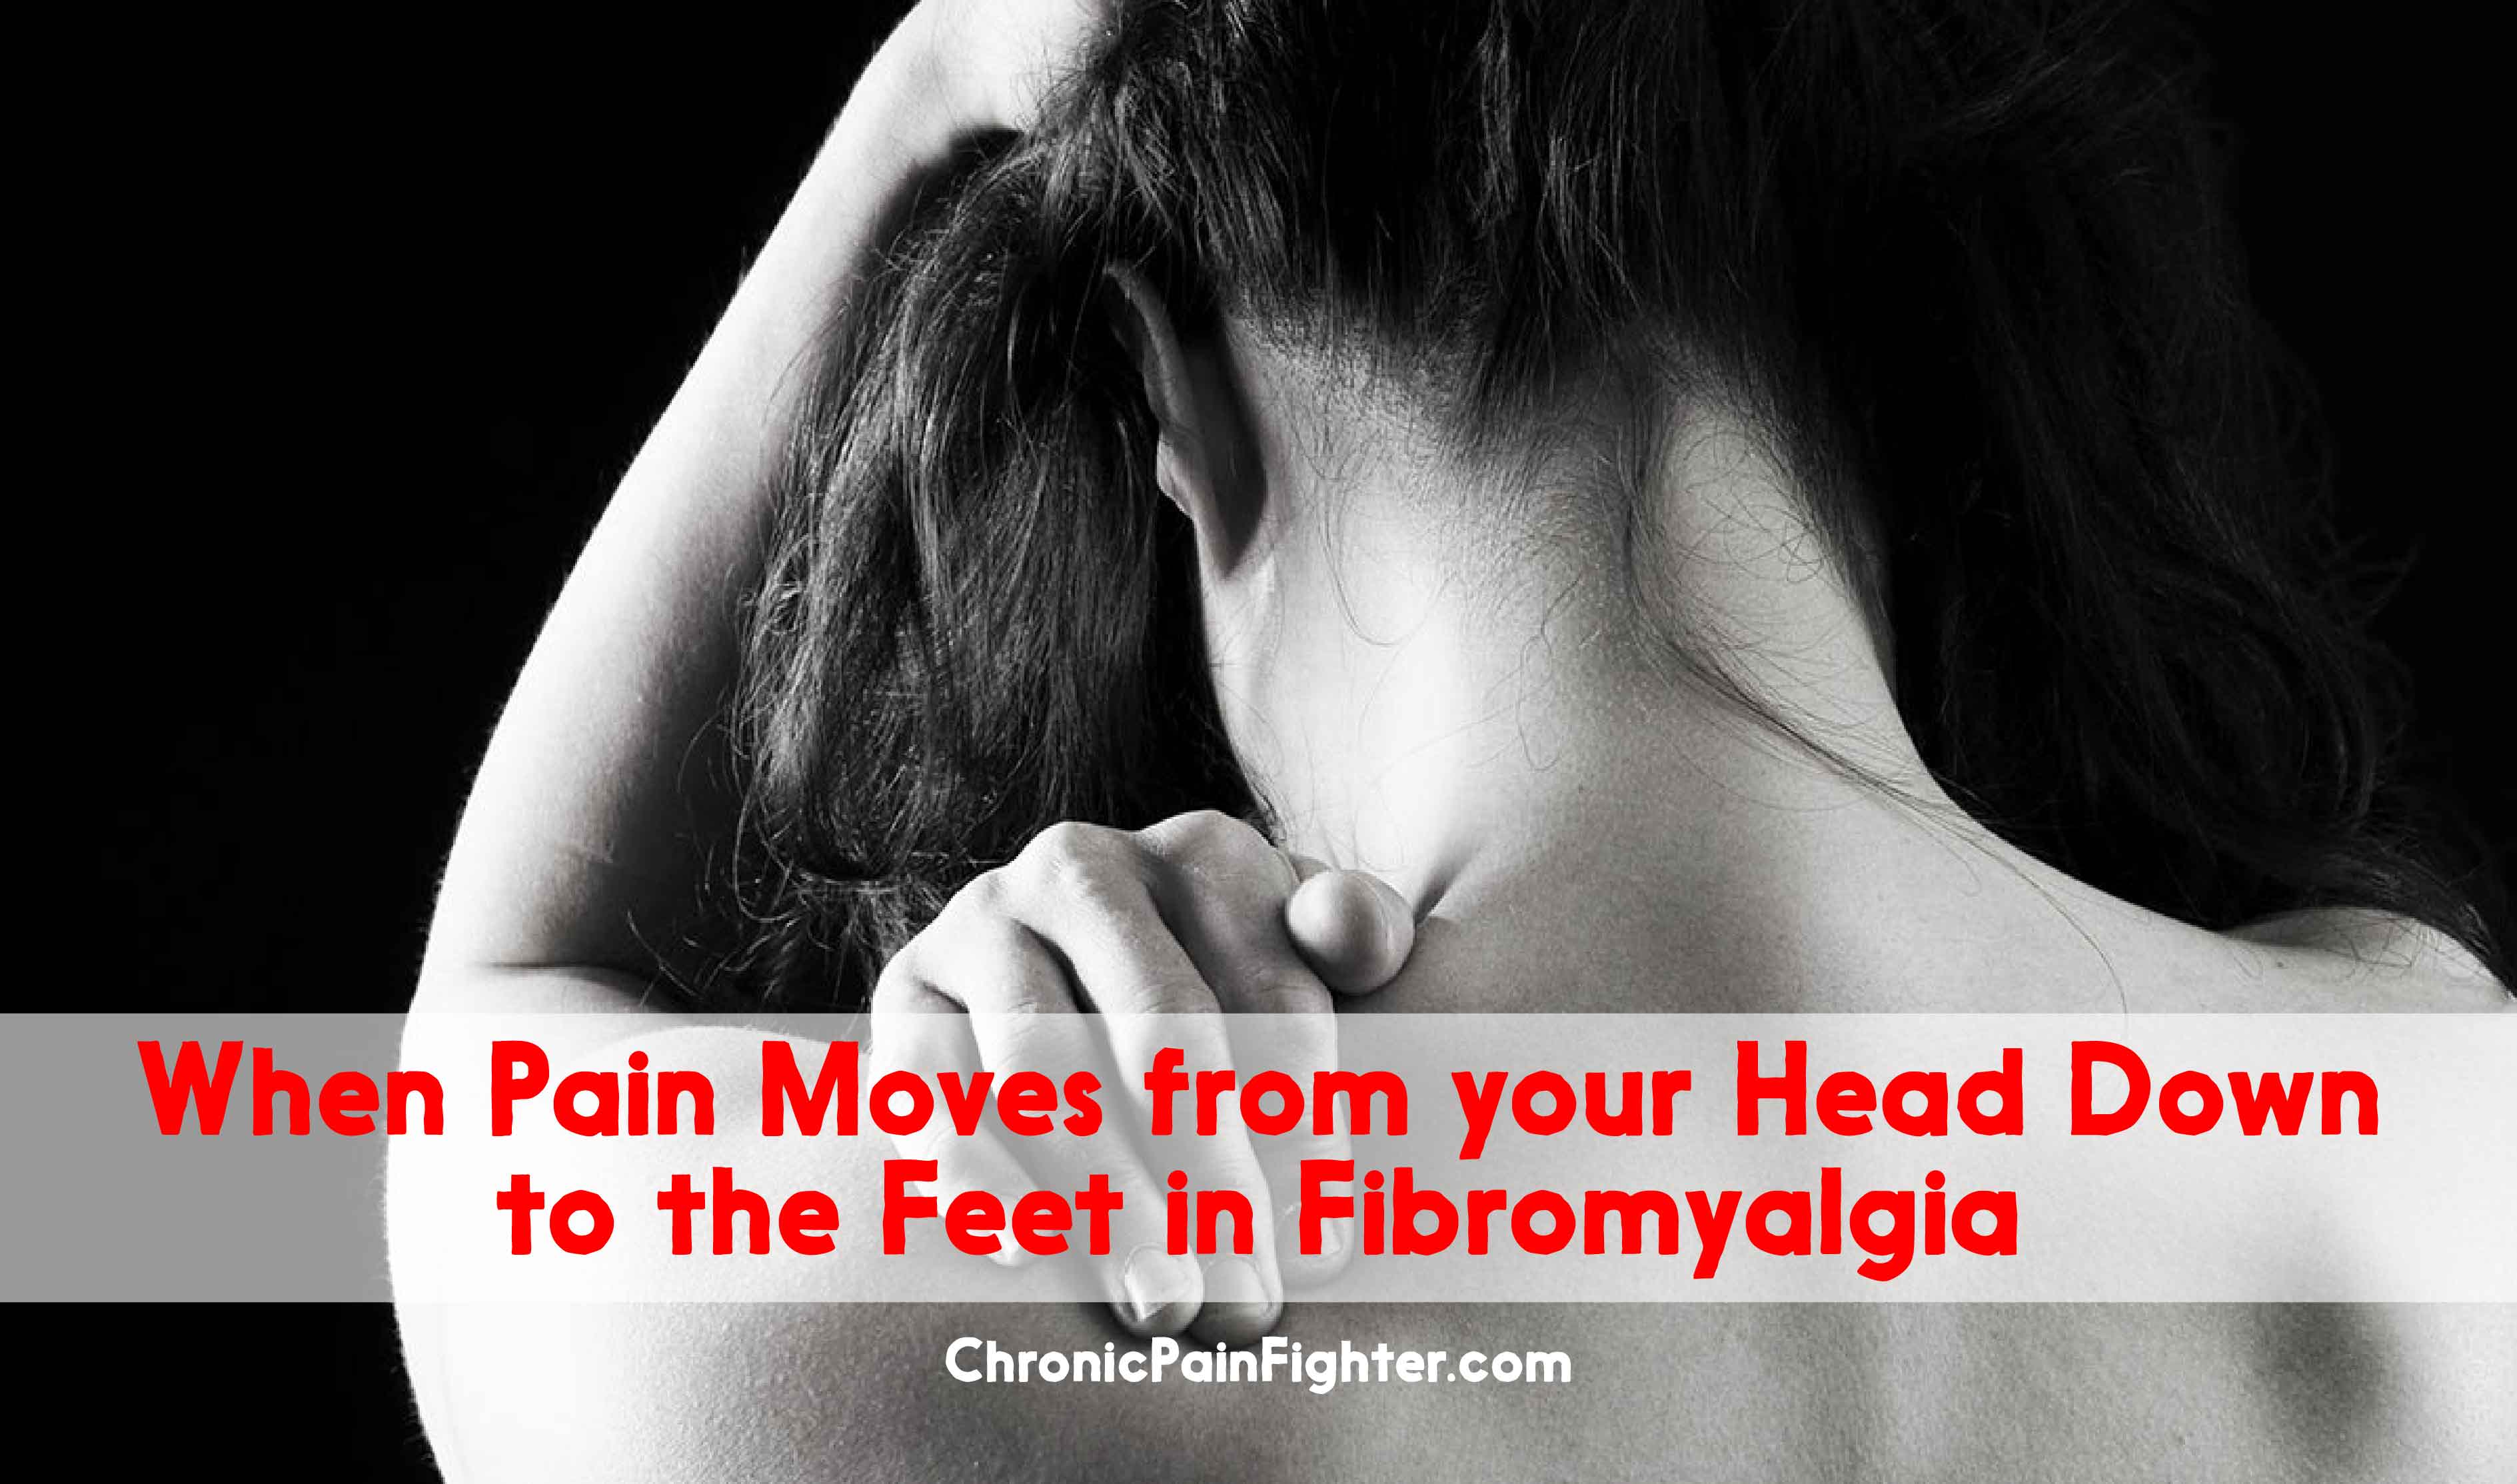 When Pain moves from your Head Down to the feet in Fibromyalgia